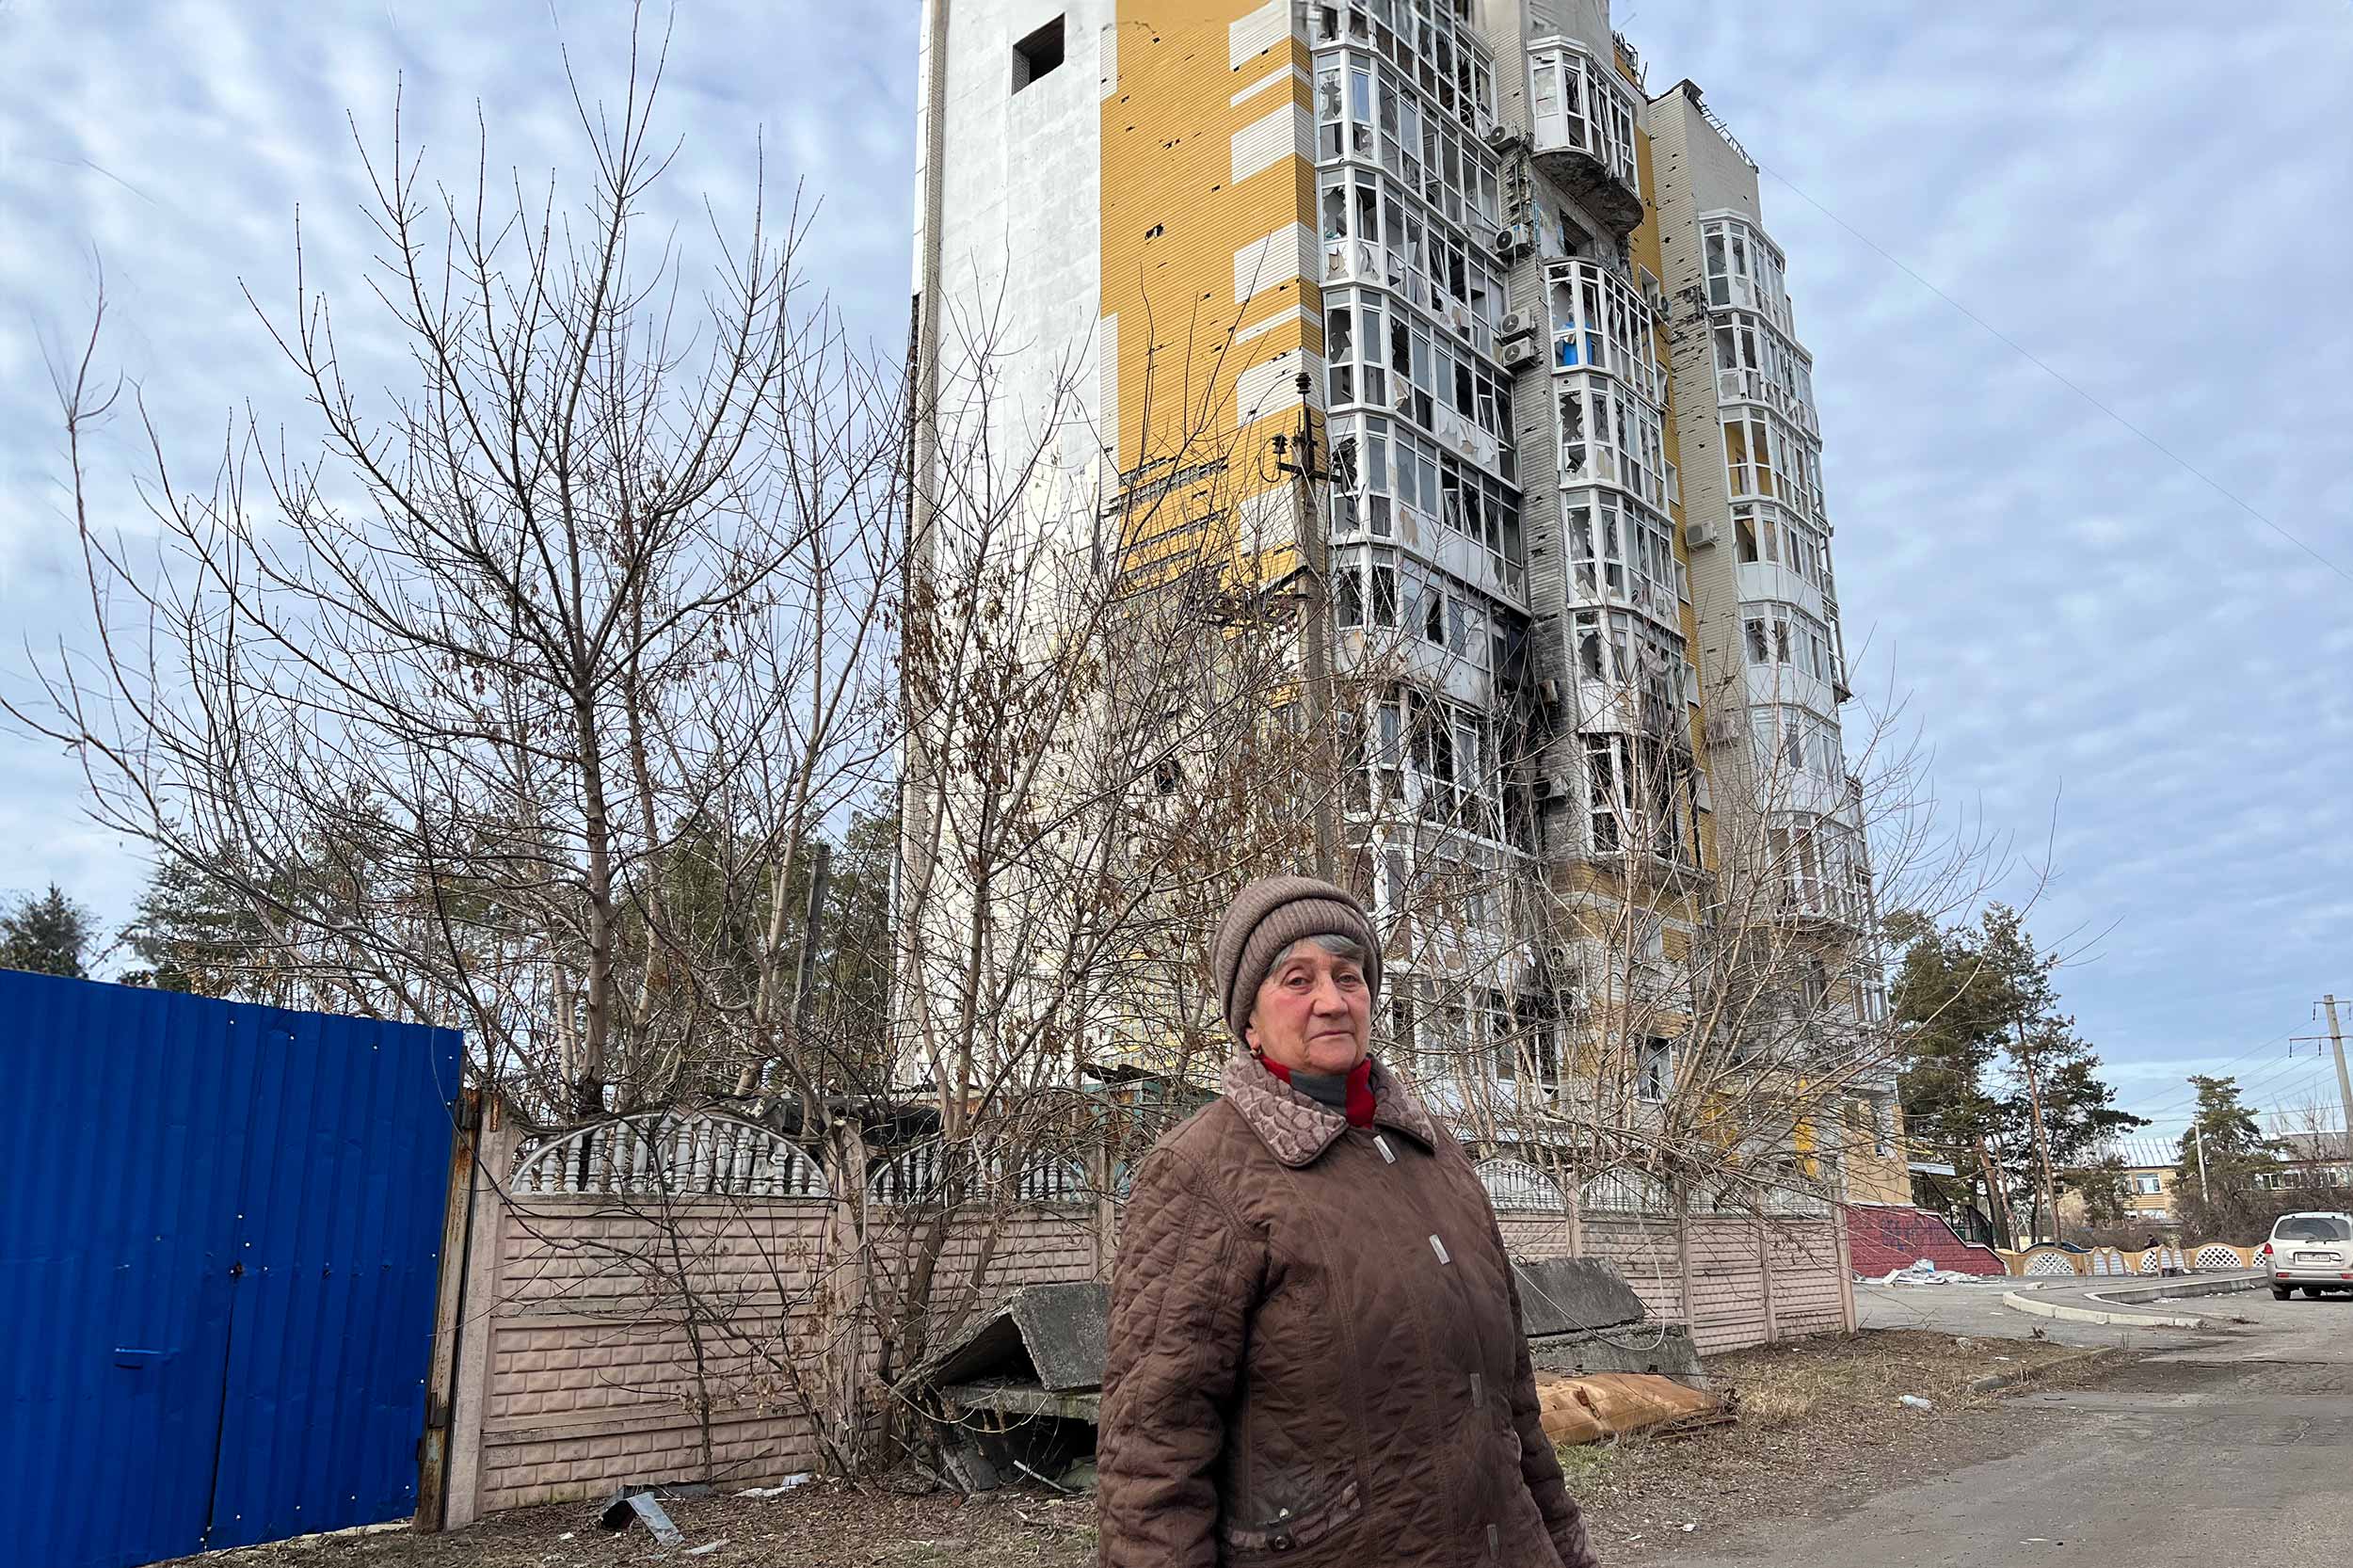 “I just want it to stop” – Valentina, an senior outside a heavily damaged residential building in Lyman, eastern Ukraine, says she wants the war to end: “We have already gone through a lot. We don’t want to experience it any longer.” © Anthony Borden